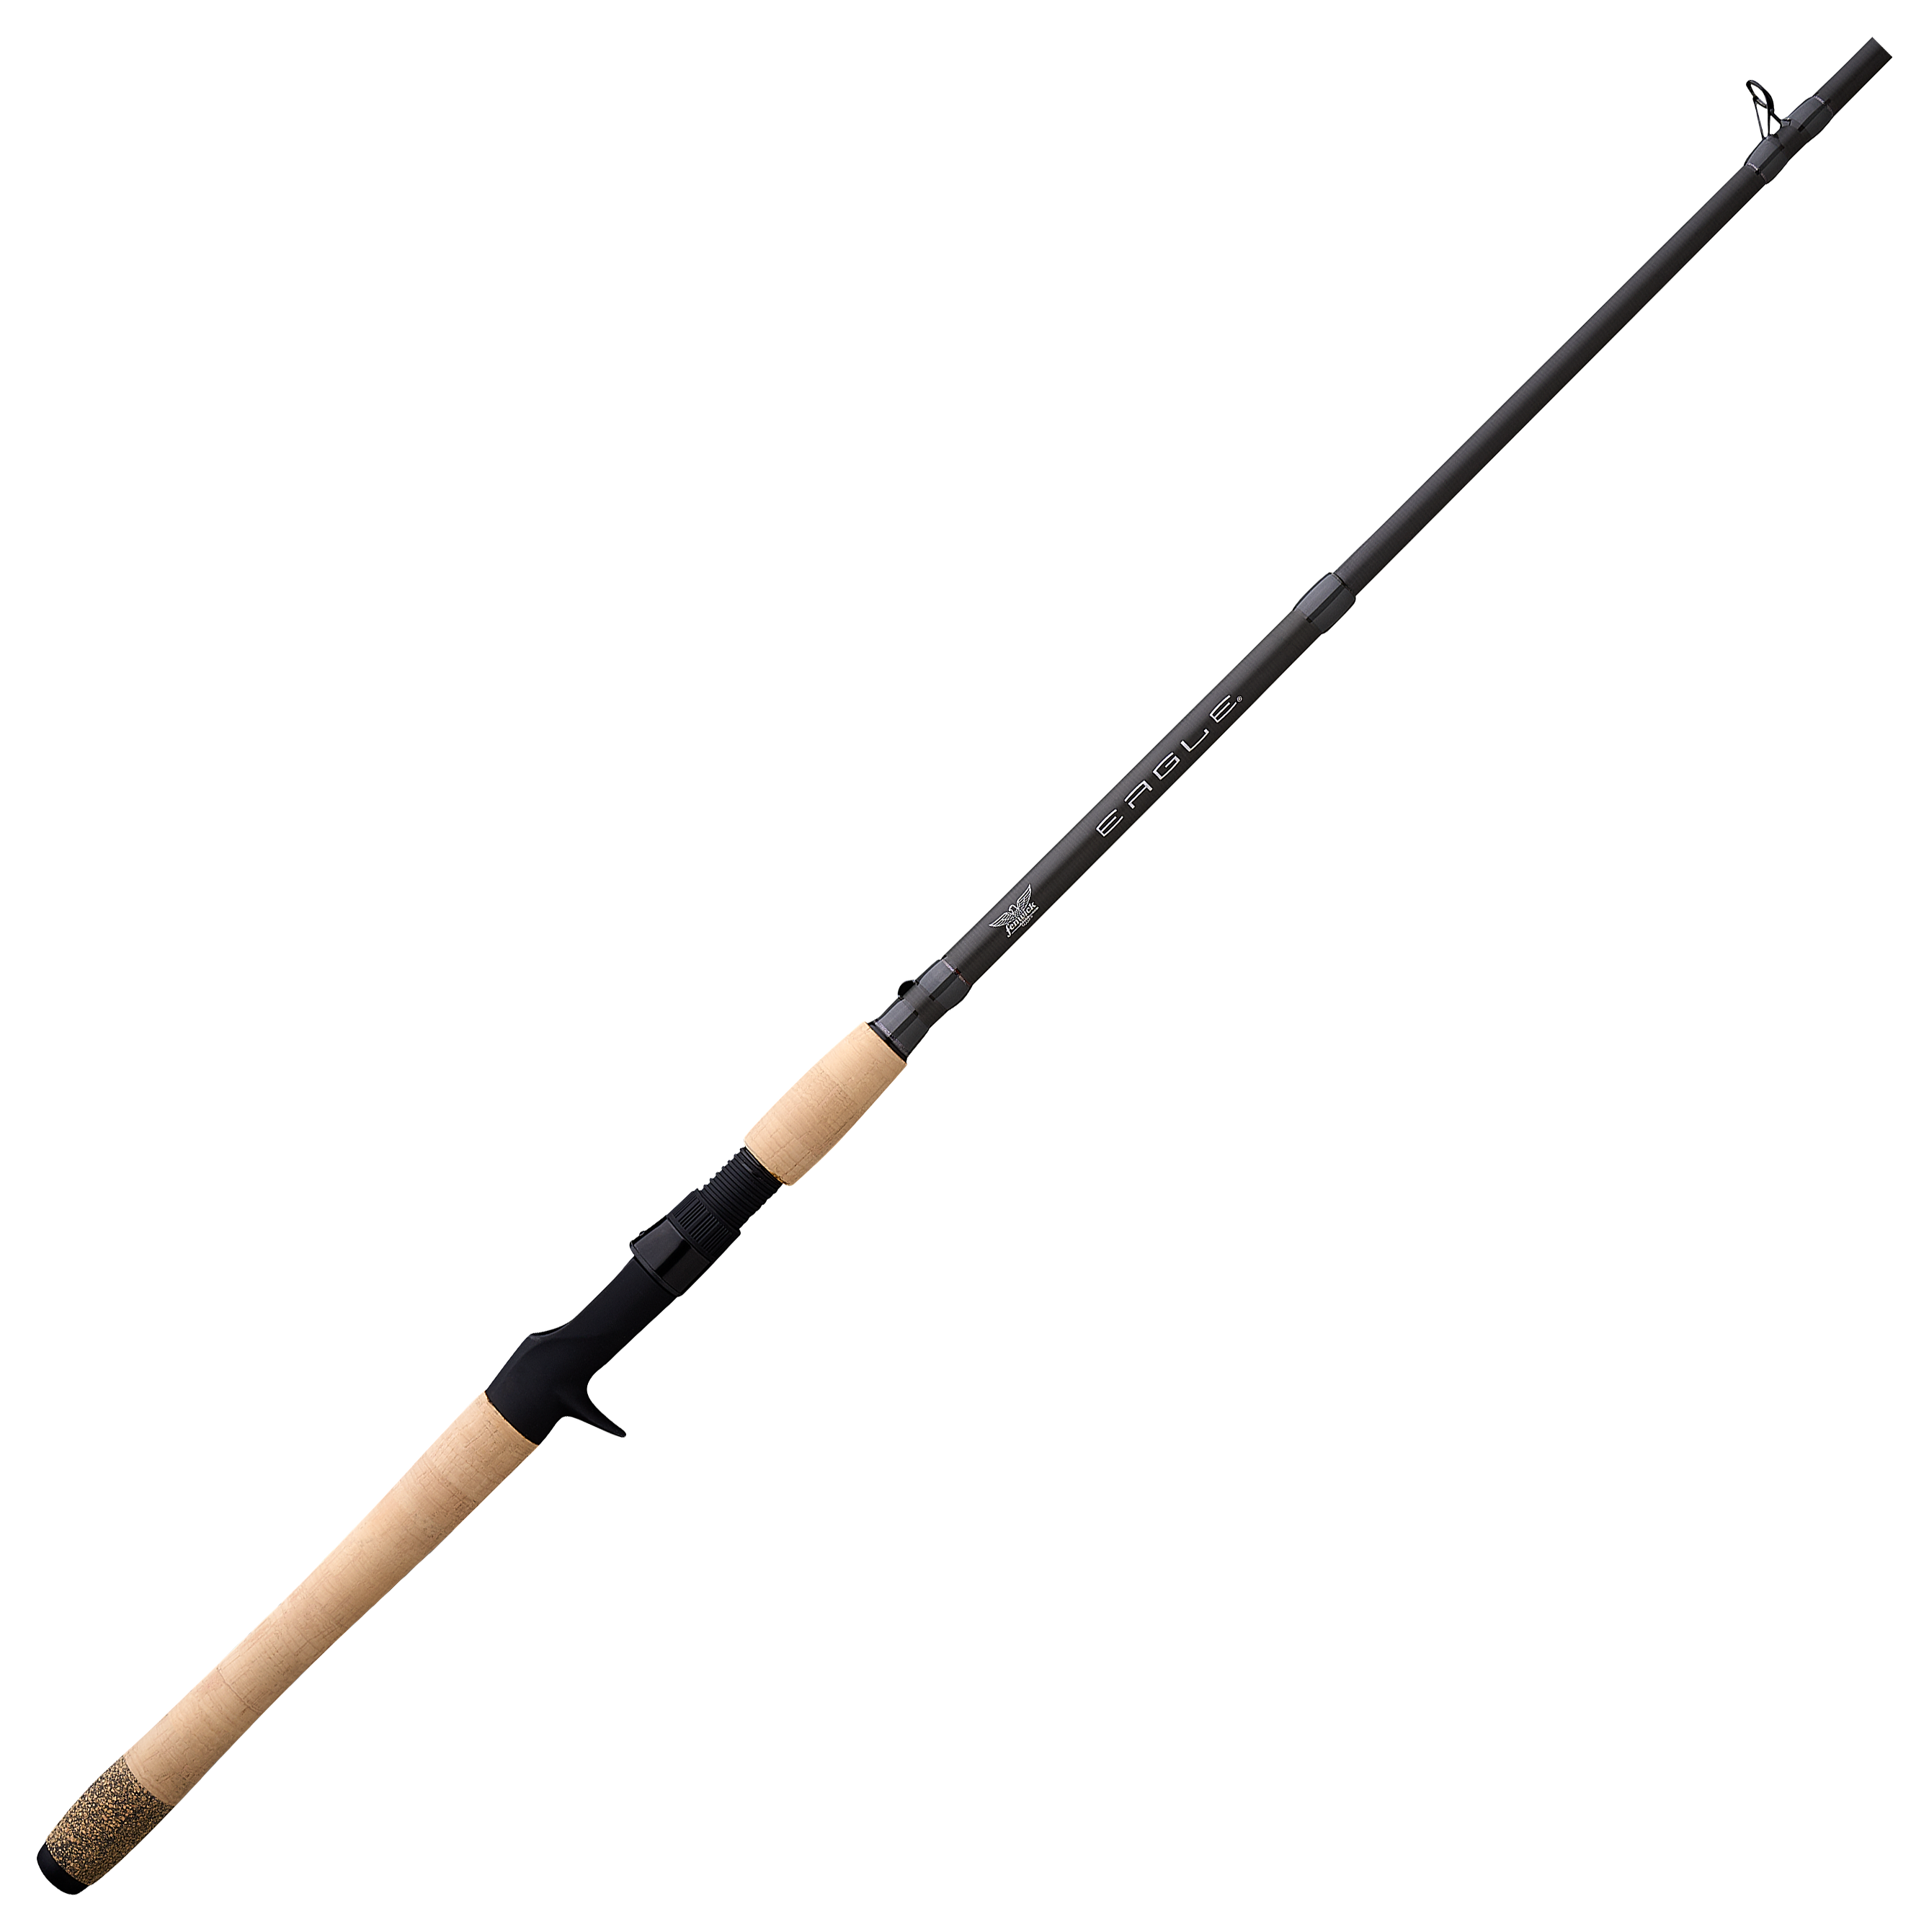 I've been using this for a few weeks. Fenwick Eagle 6'6 ML with Daiwa  Legalis LT. I would highly recommend this for anyone looking for budget  friendly combo. : r/Fishing_Gear